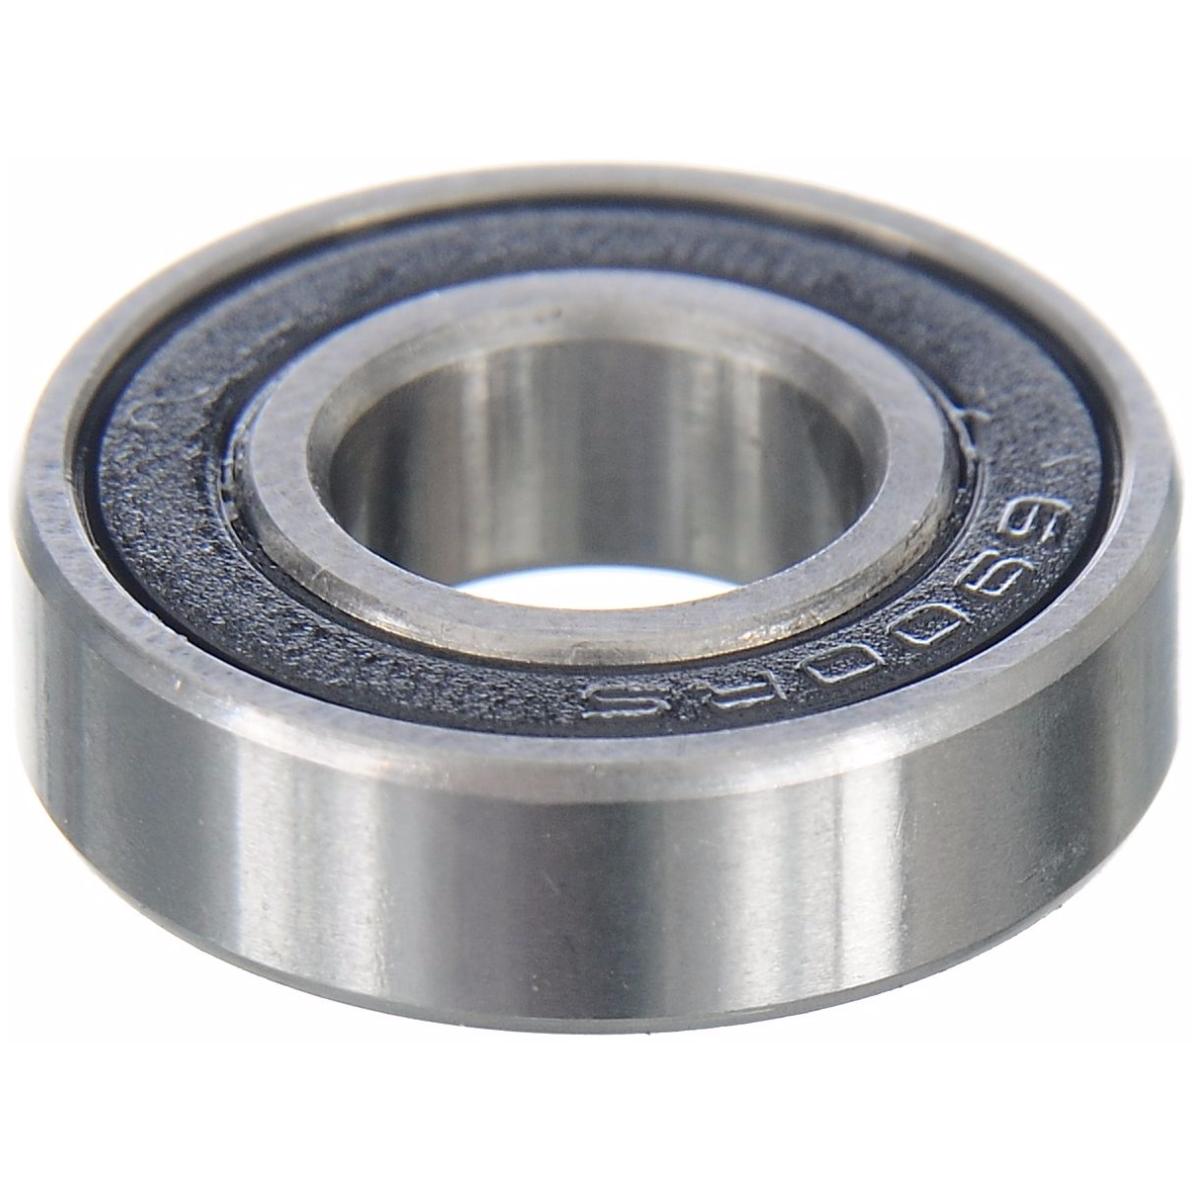 Brand-x Sealed Bearing (6900 2rs)  Silver